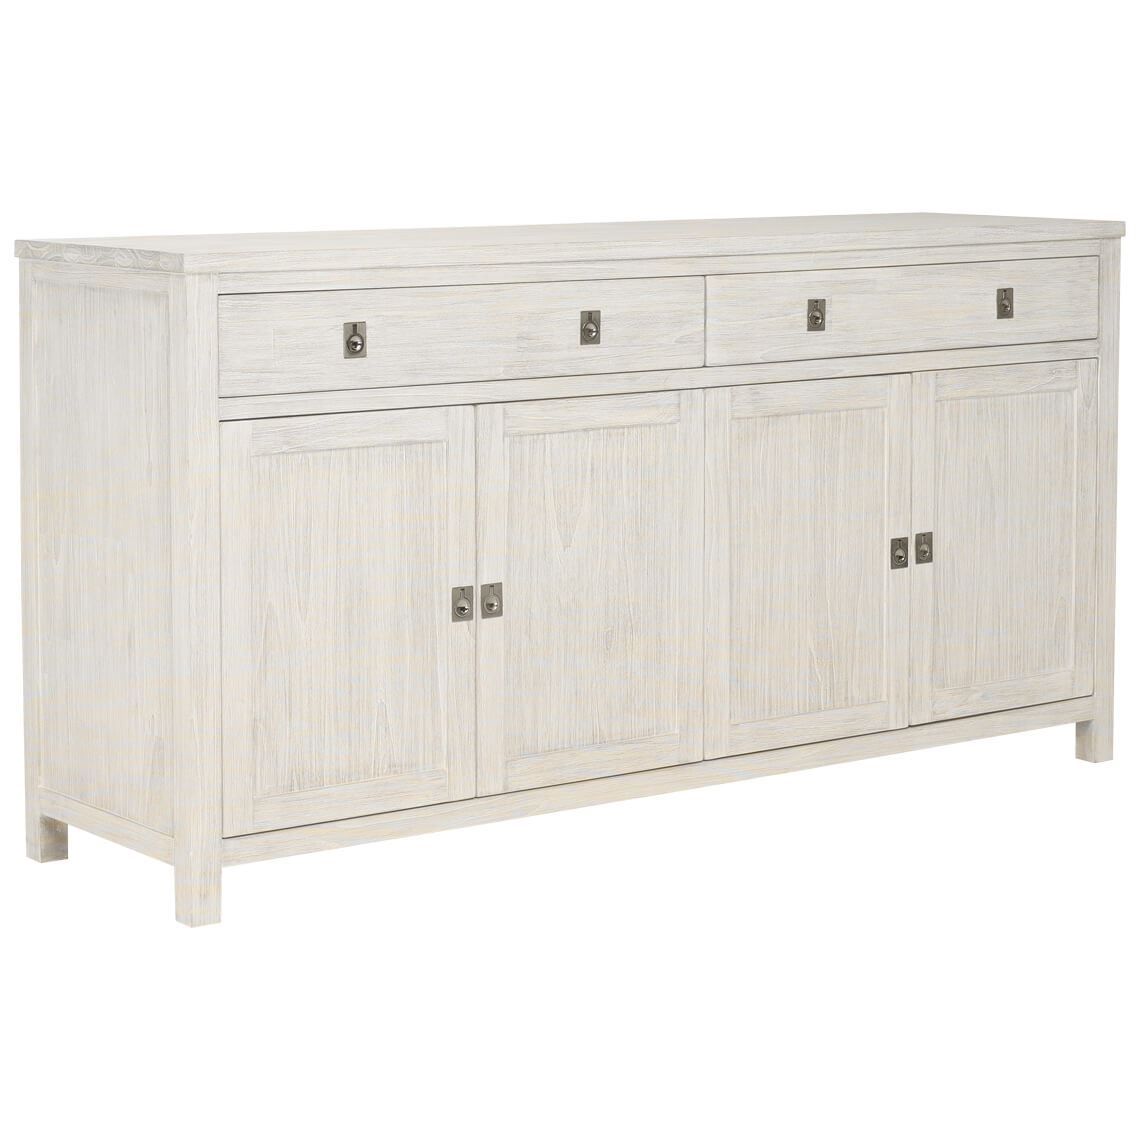 Cancun Buffet | Freedom Throughout White Wash 4 Door Sideboards (View 10 of 30)